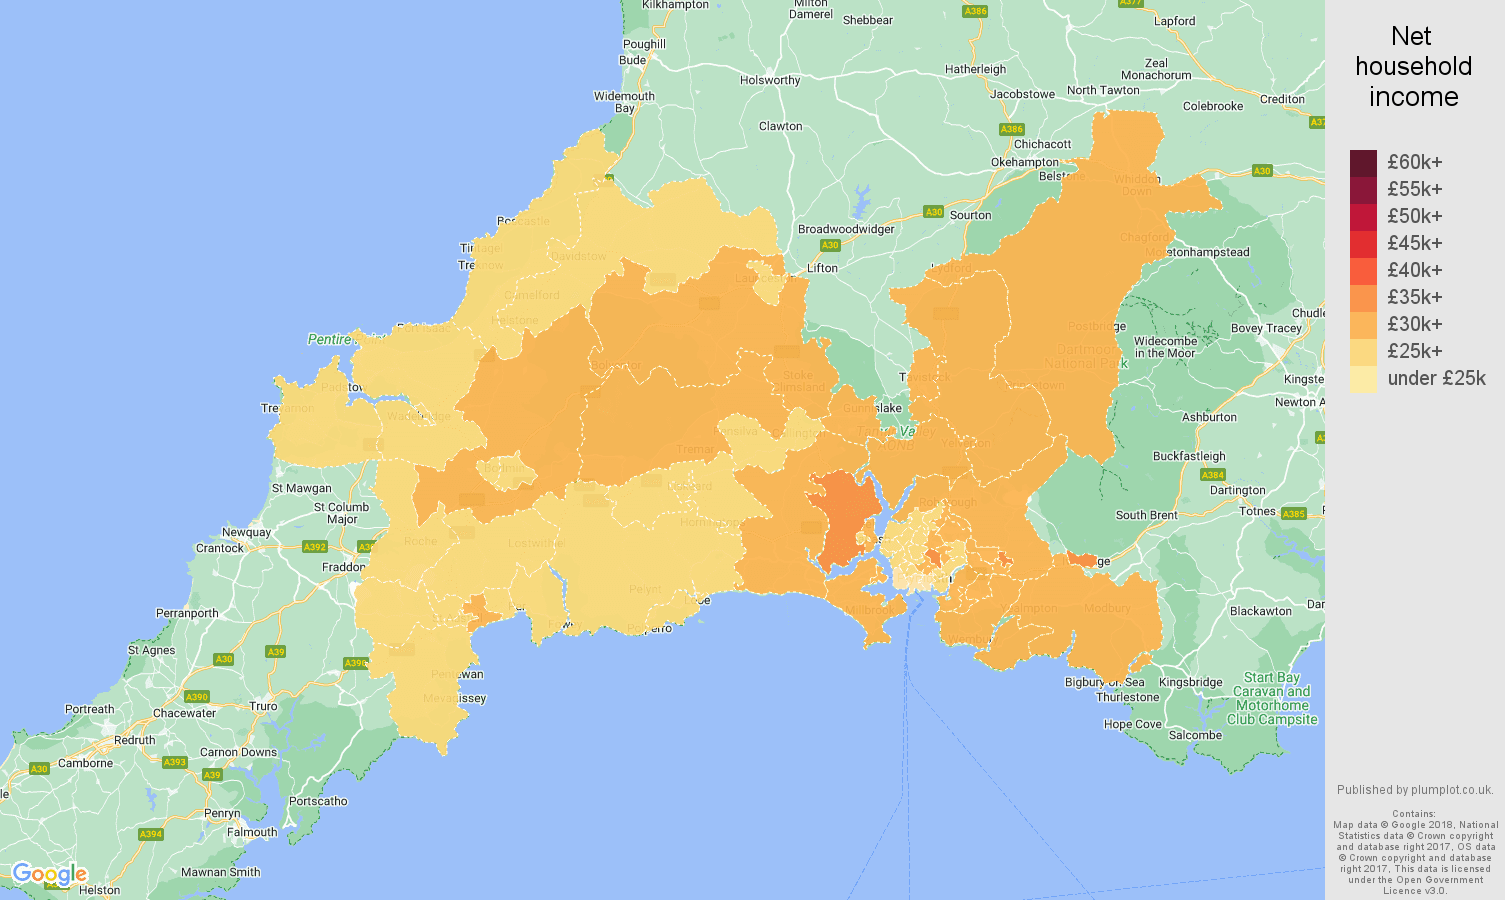 Plymouth net household income map